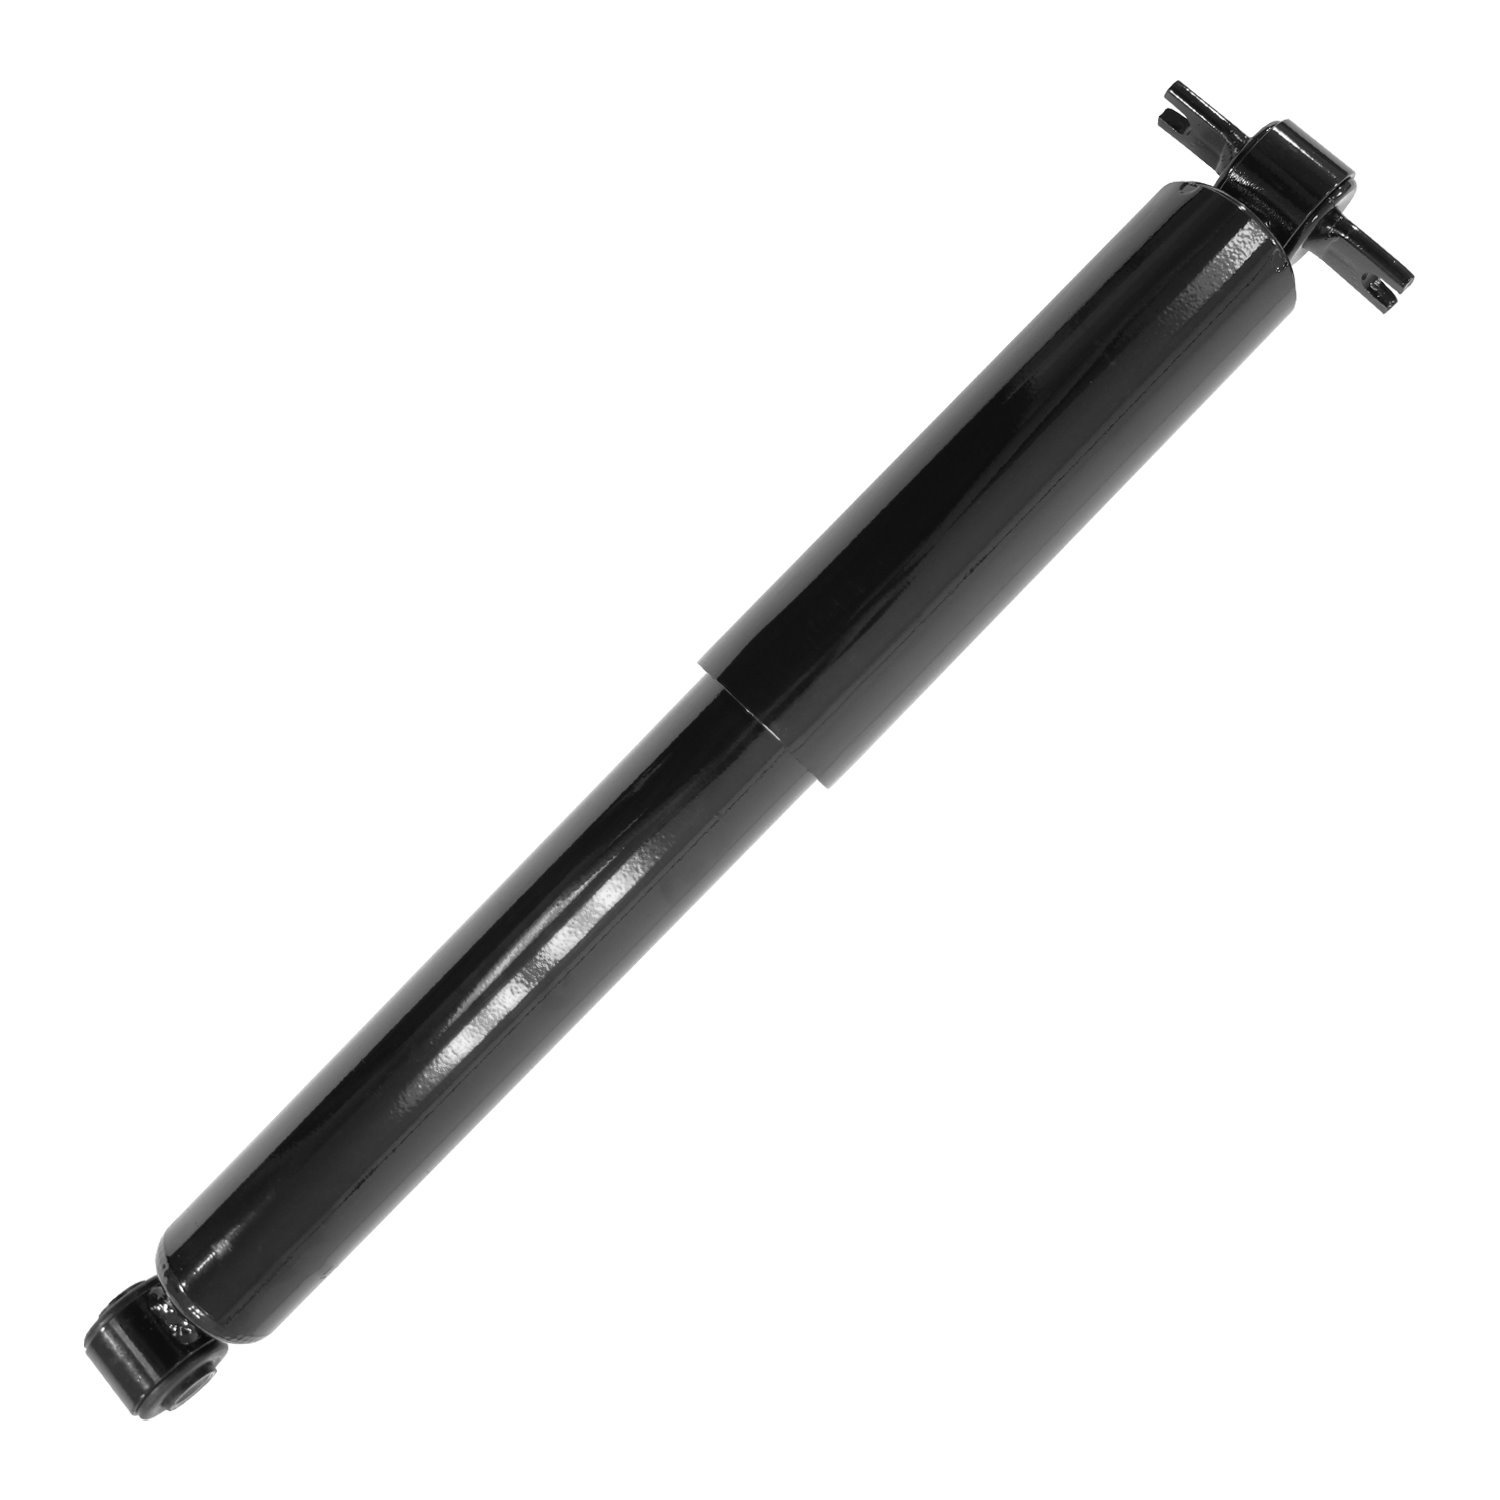 253310 Gas Charged Shock Absorber Fits Select Jeep Wrangler, Jeep TJ